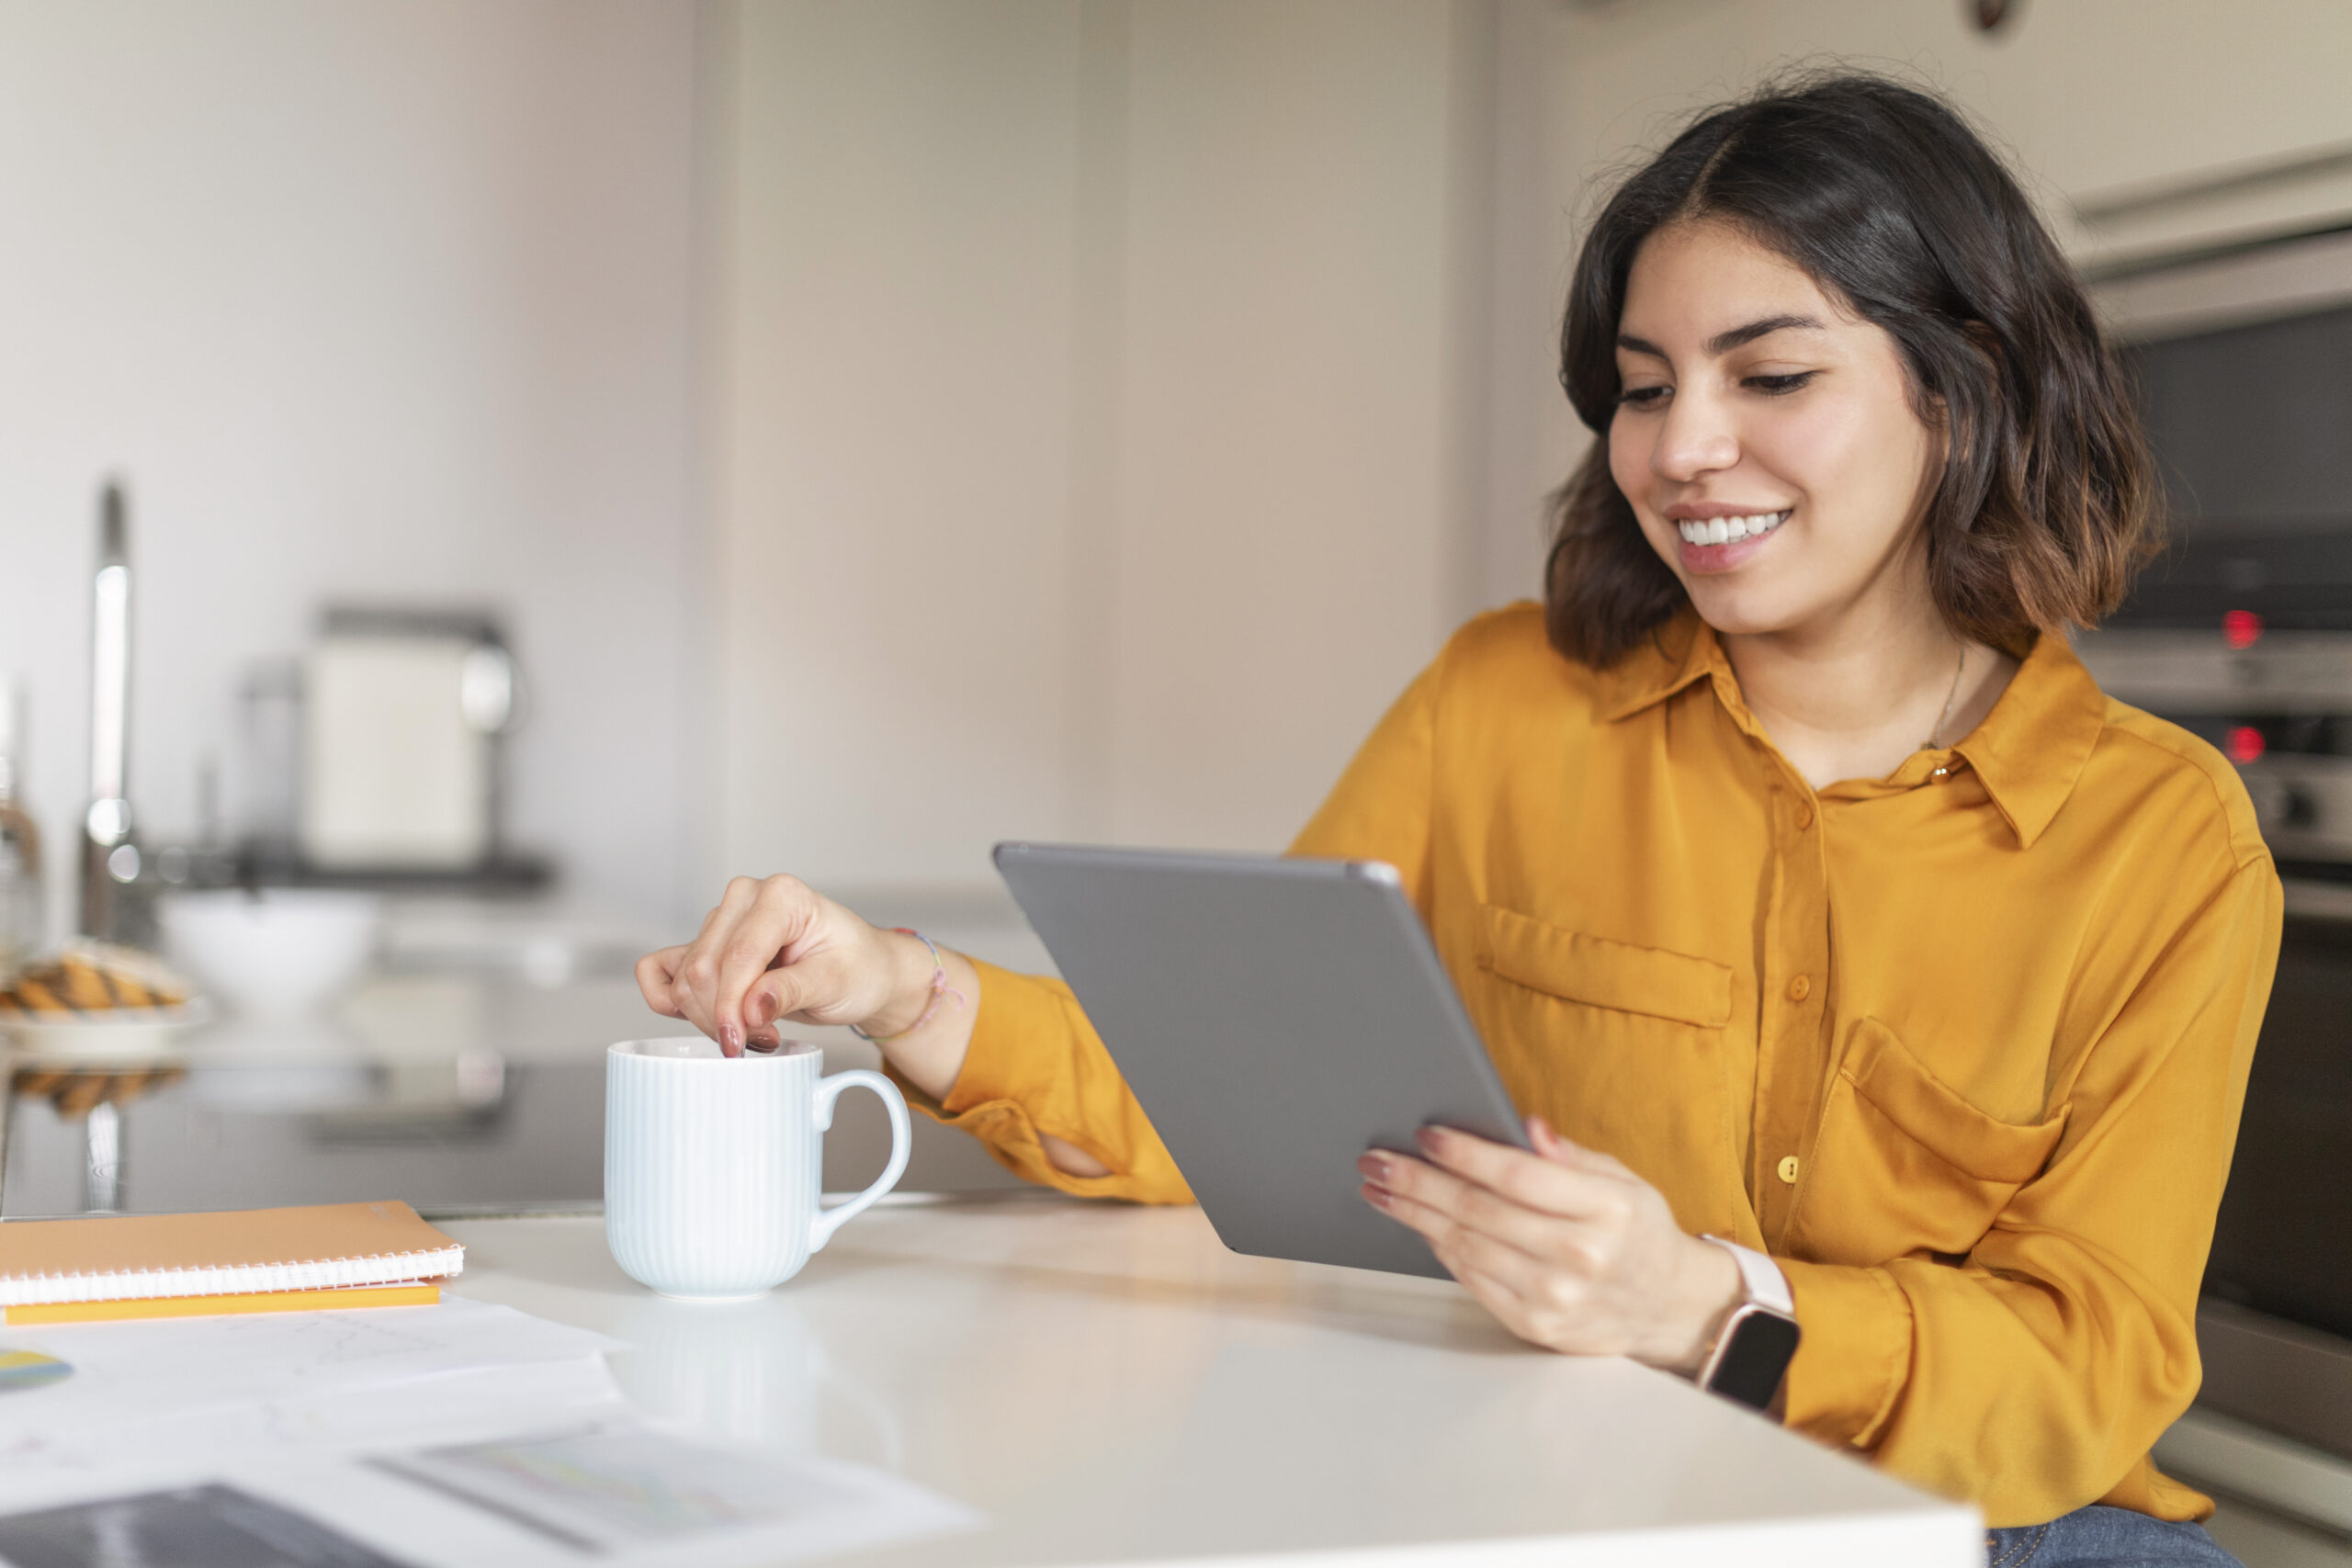 Happy Young Arab Woman Relaxing With Digital Tablet In Kitchen And Drinking CoffeeAt Home, Smiling Middle Eastern Female Browsing Internet On Modern Gadget And Enjoying Hot Drink, Free Space